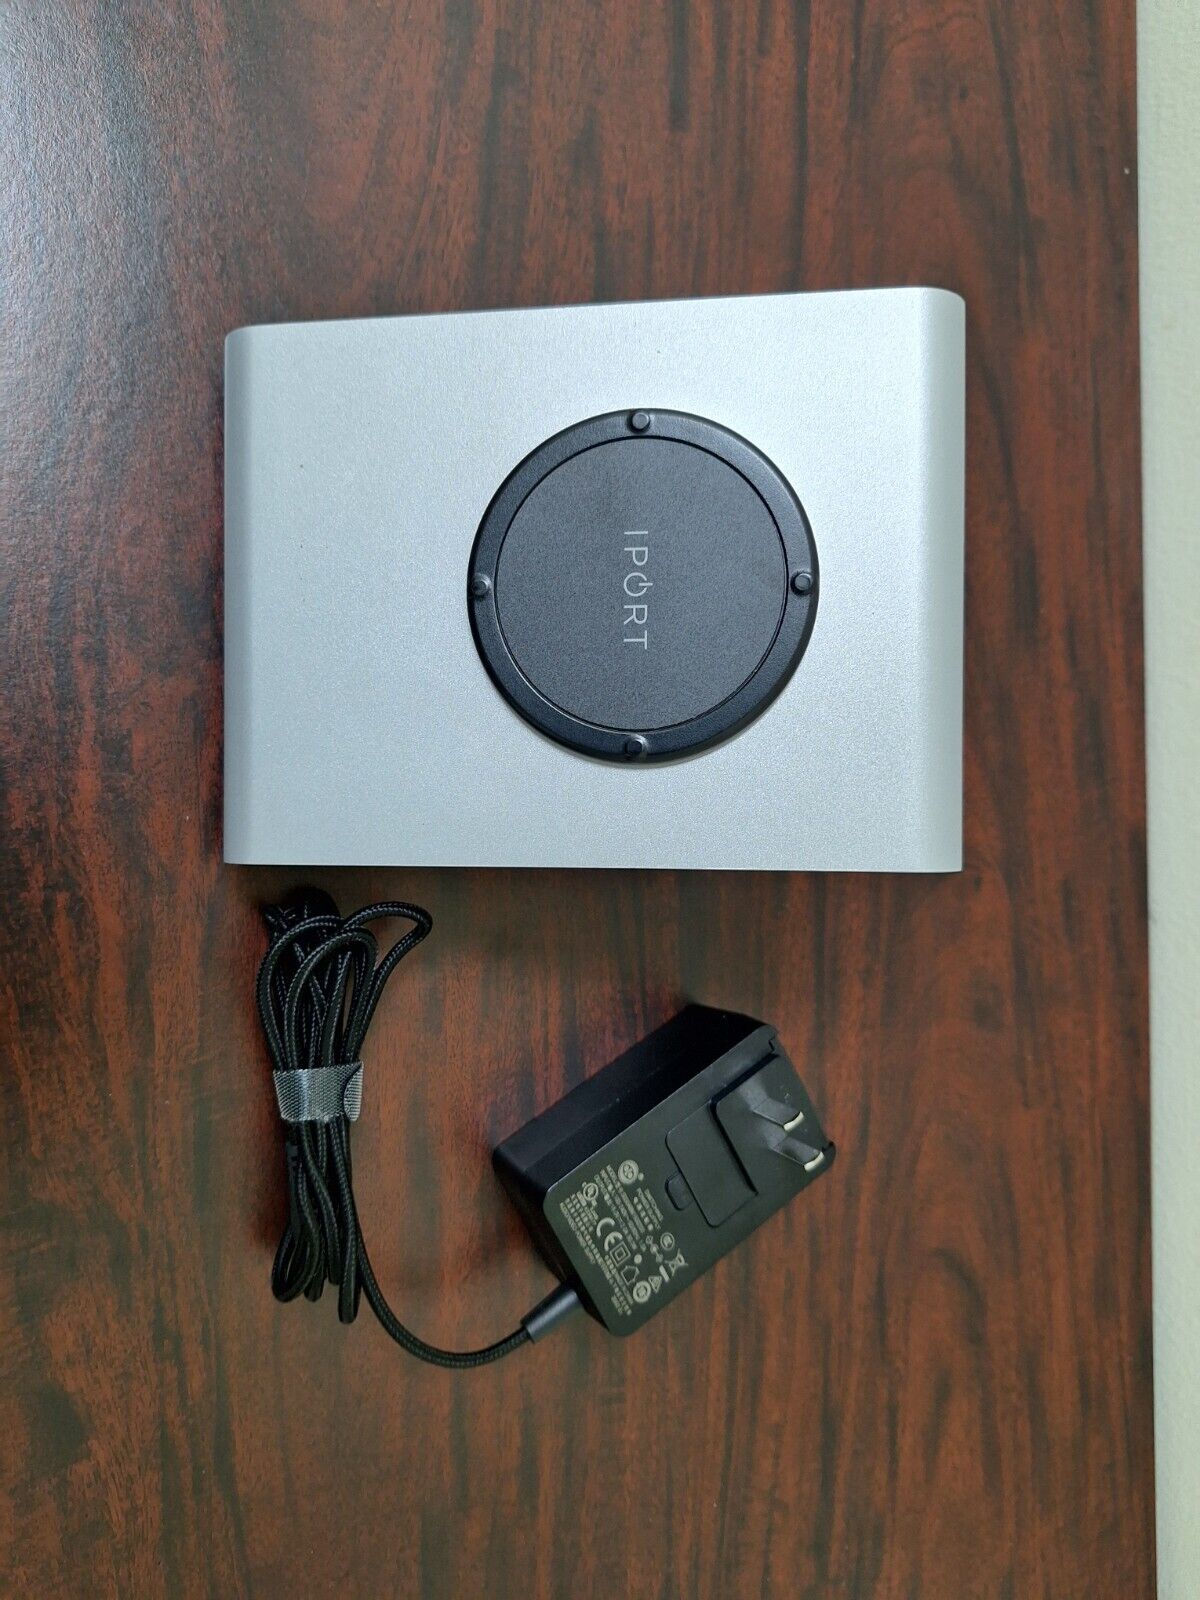 iPort - LaunchPort iPad Wireless Charging System Base Station